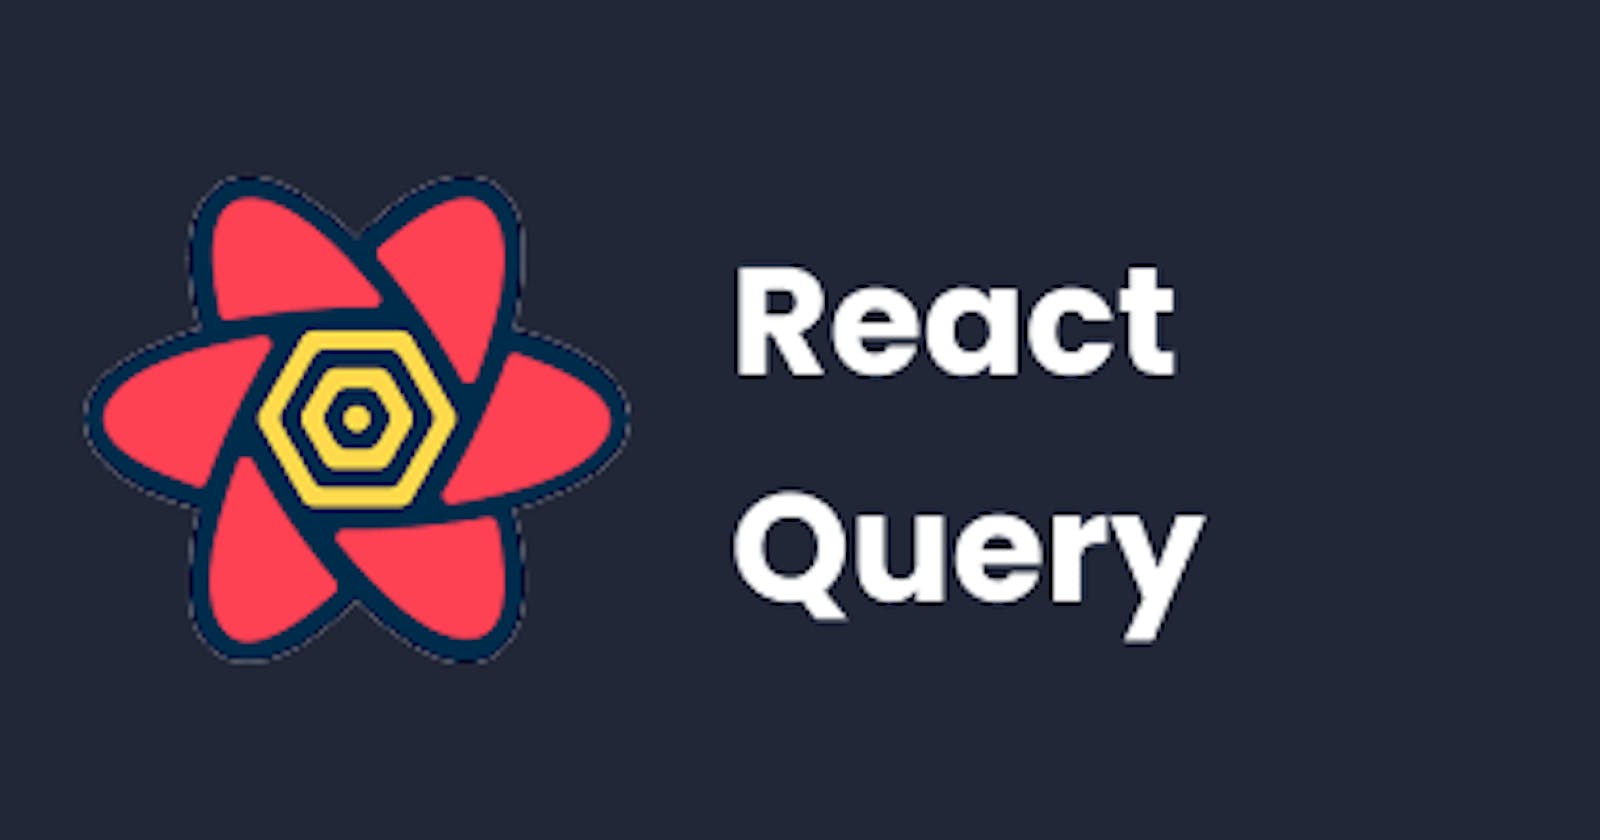 Making Use of React Query in Fetching Data and Adding Pagination for Performance Optimization in React.